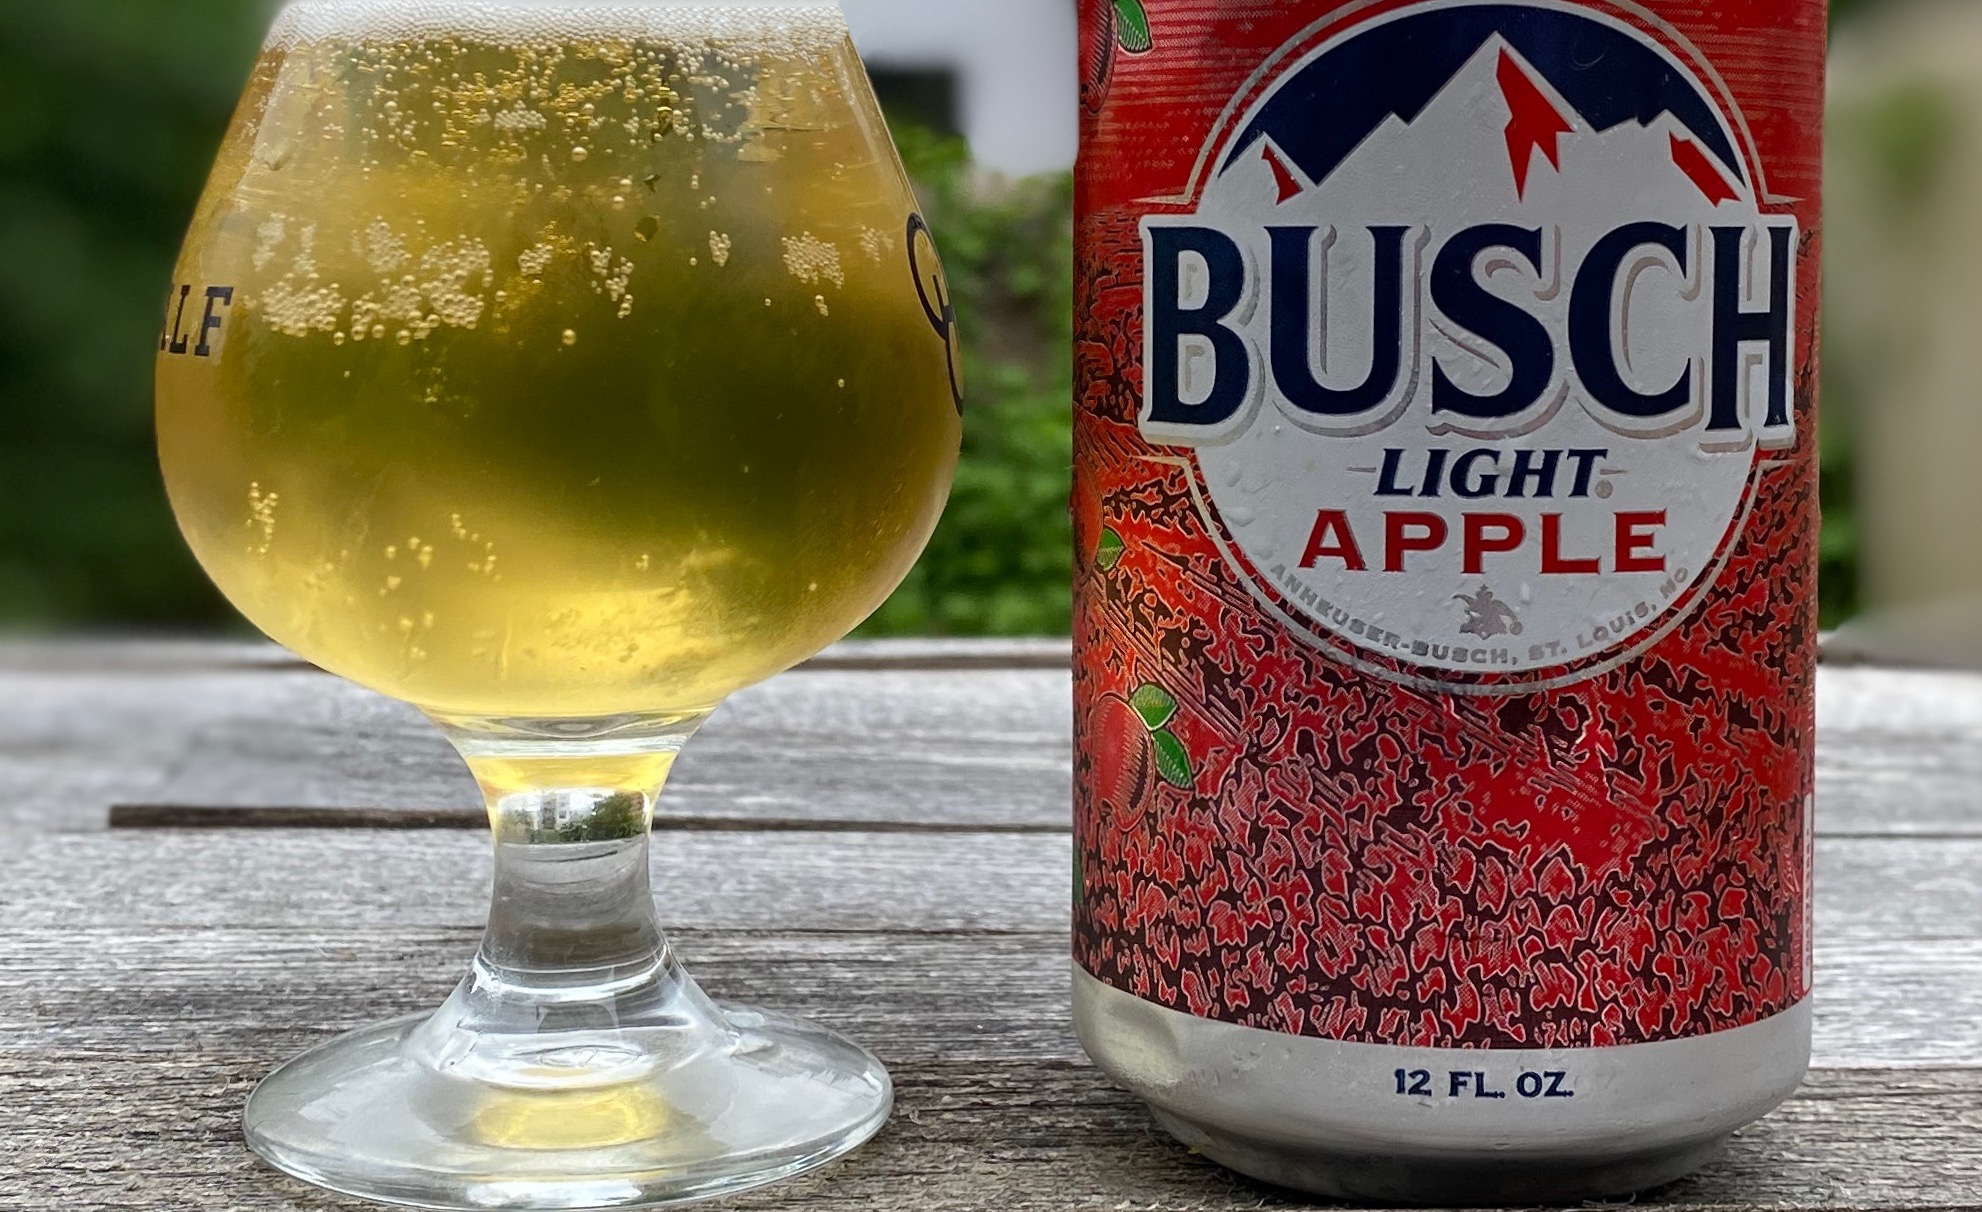 Busch Light Apple Review—A Beer You'd Never Think Of And A Combo That